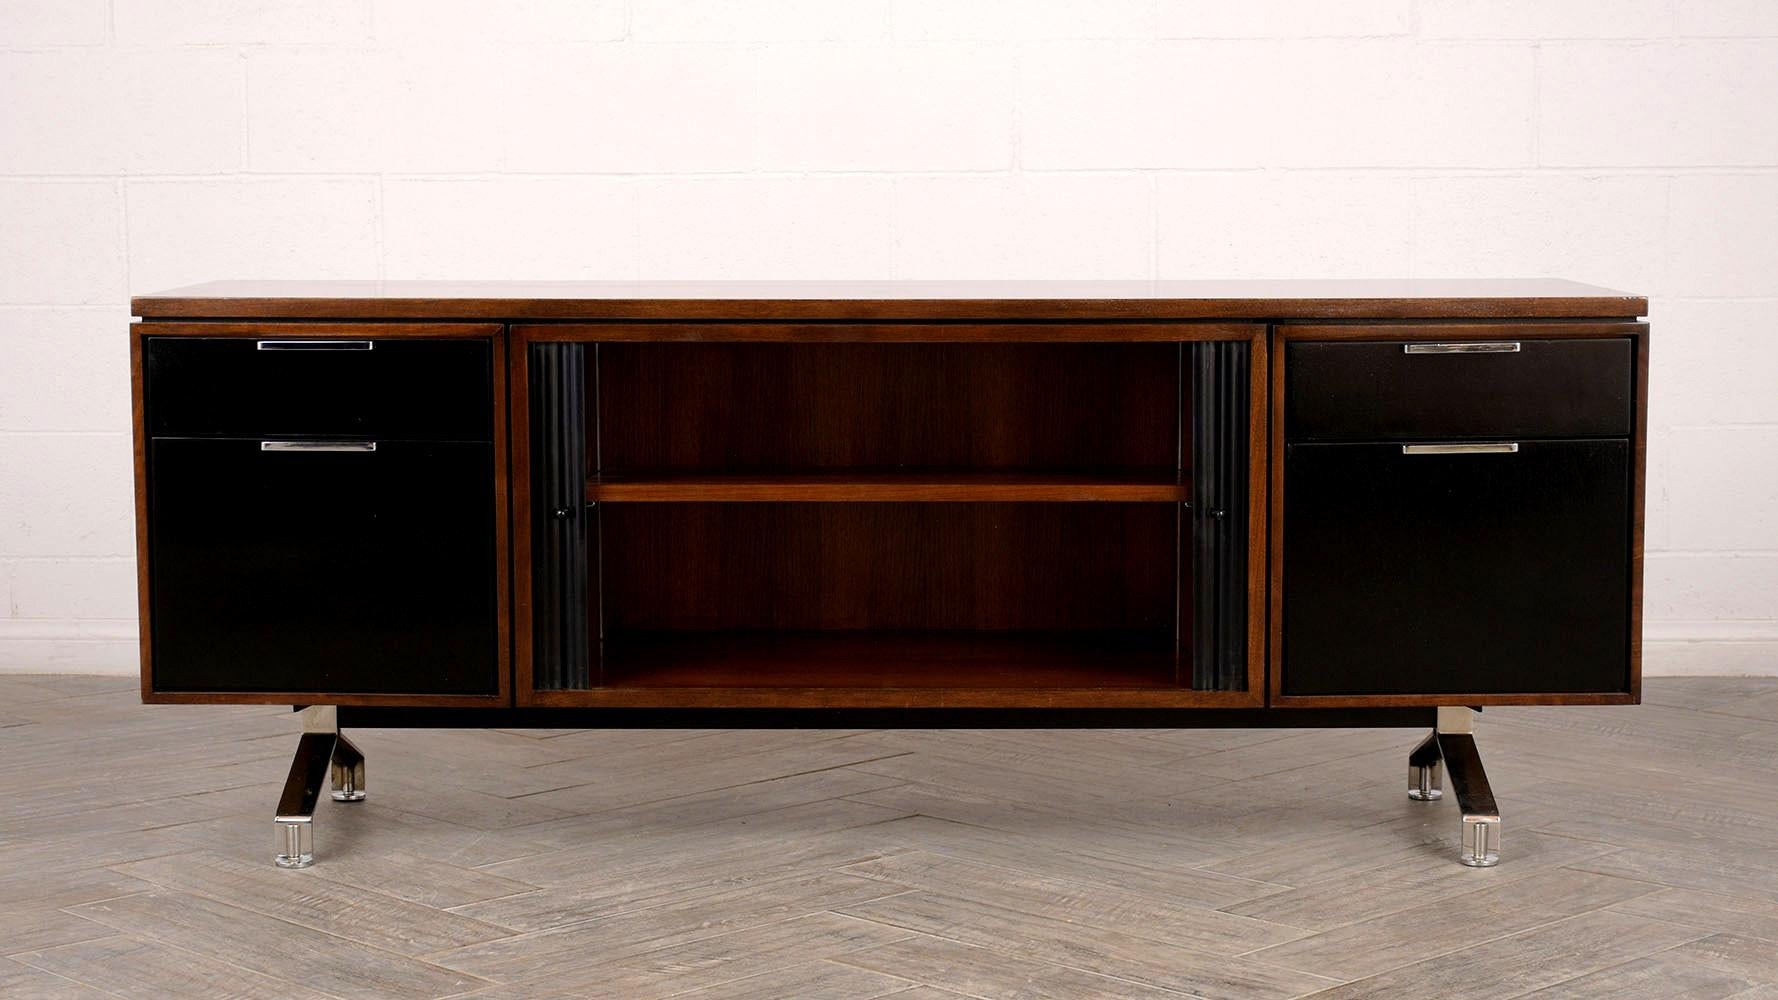 Beautiful Mid-Century Modern walnut credenza, its been stained in a rich walnut and black color combination with lacquer finish. With two sliding tambour doors at the center of the piece, combined with two small top drawers and two deep bottom